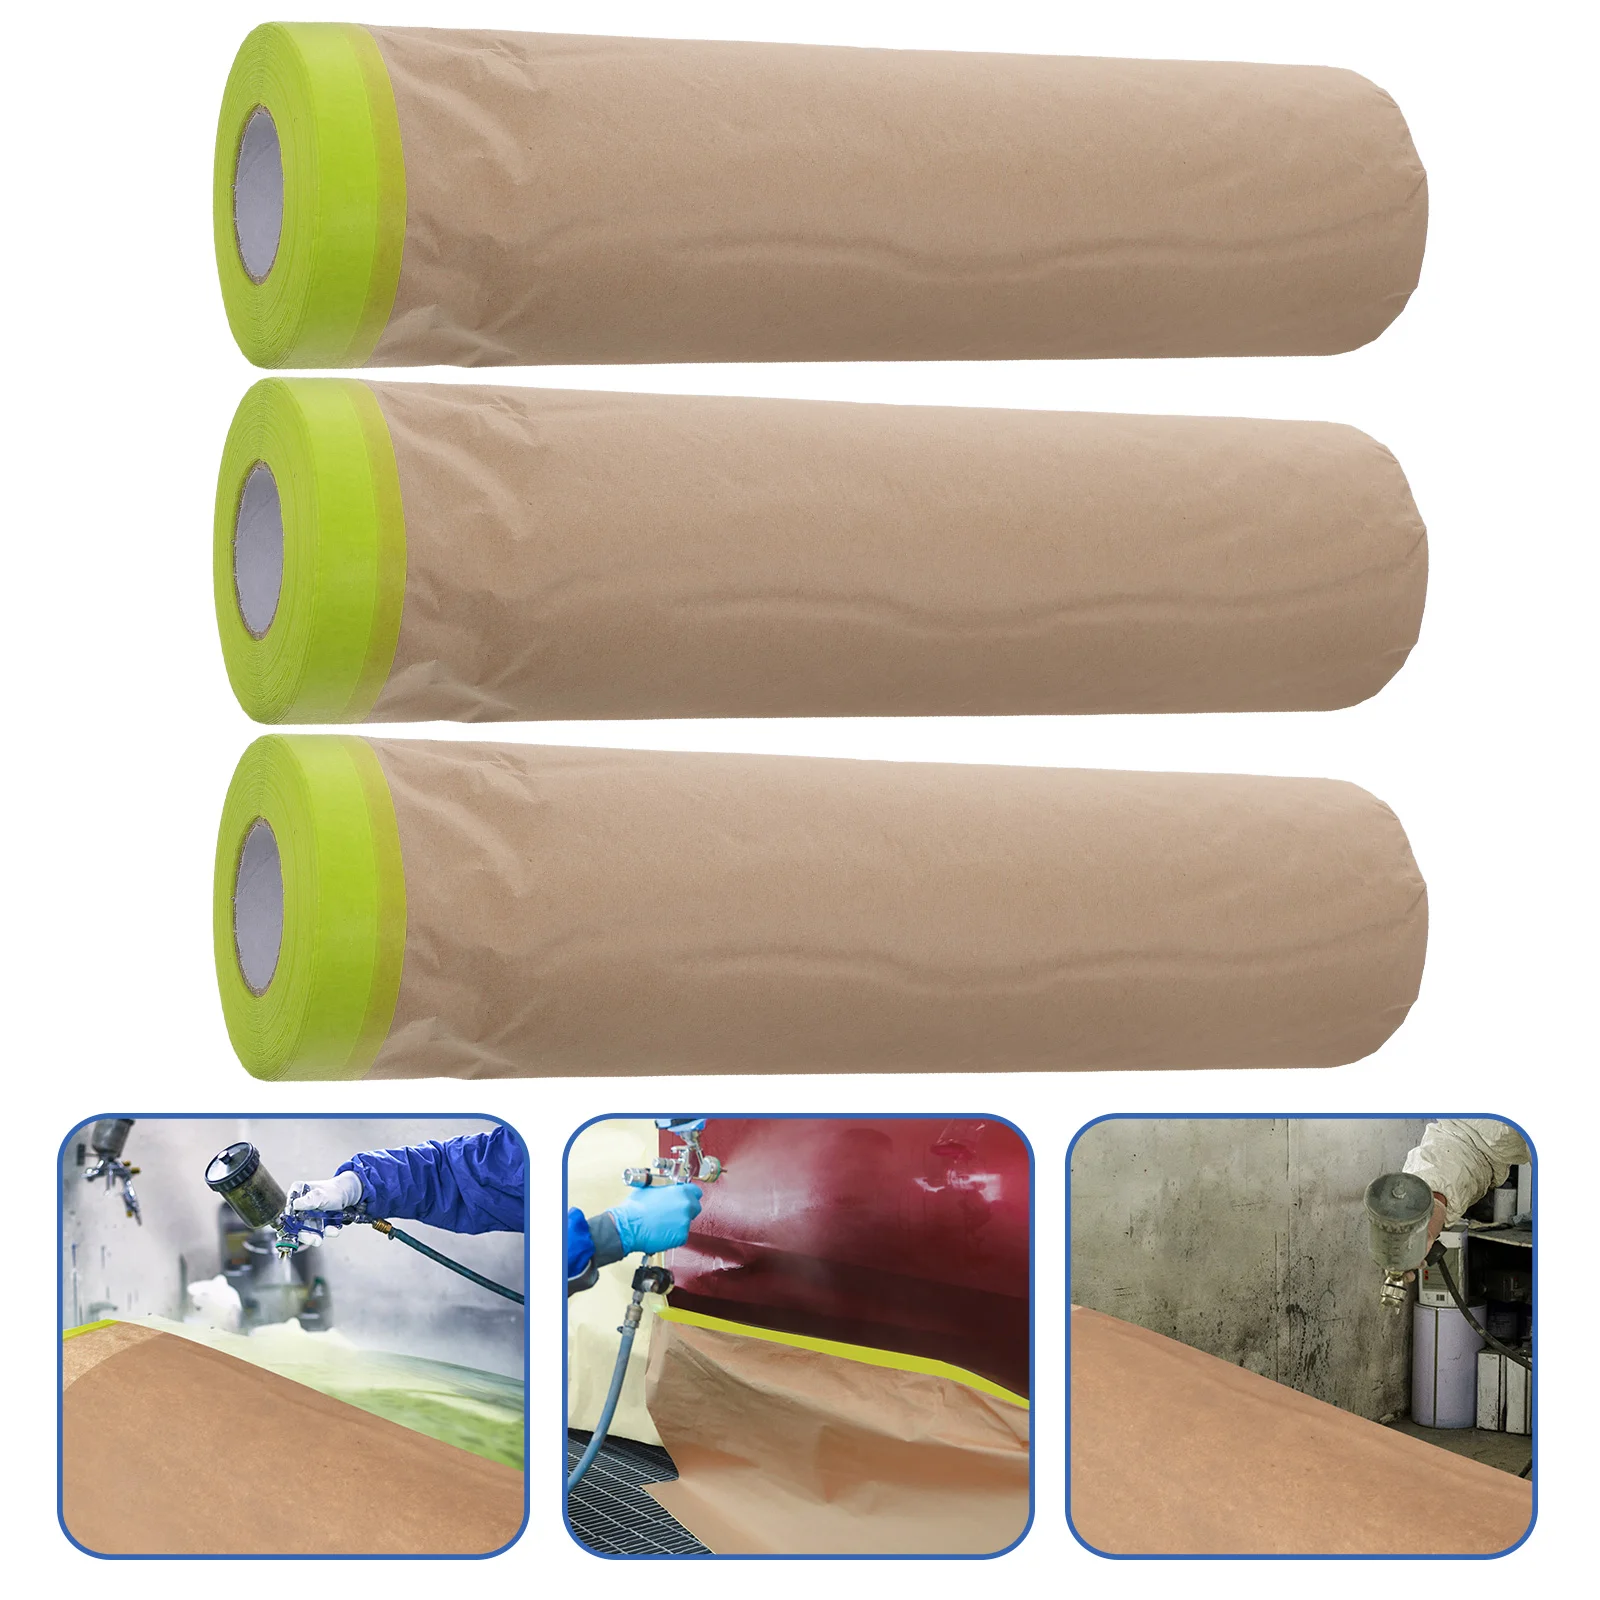 

3 Rolls Translucent Masking Film Home Paper Painting Autobody Furniture Papers Frisket Automotive Supplies